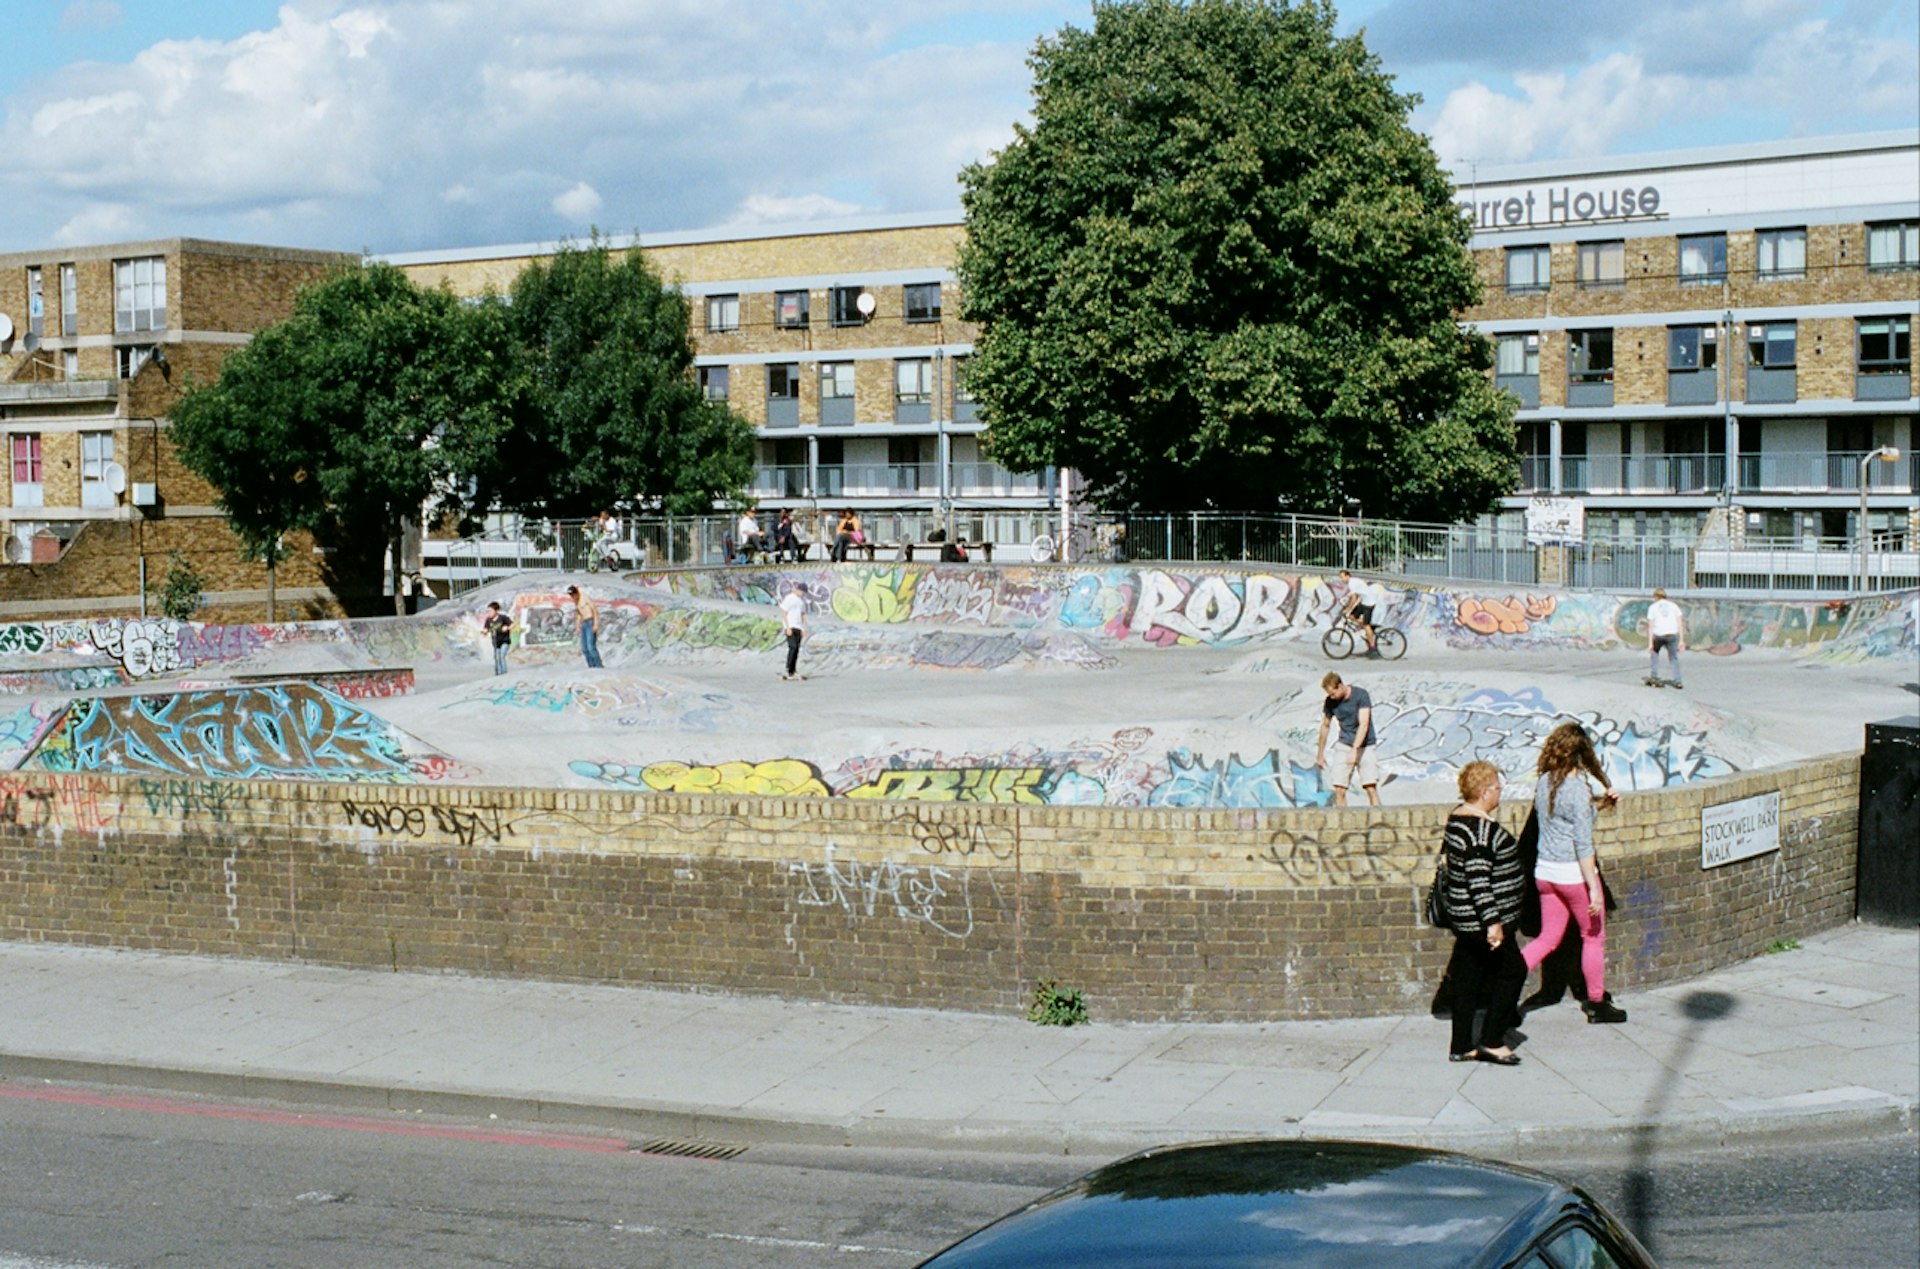 Stockwell Skatepark is a Utopia for all in the heart of an unequal city